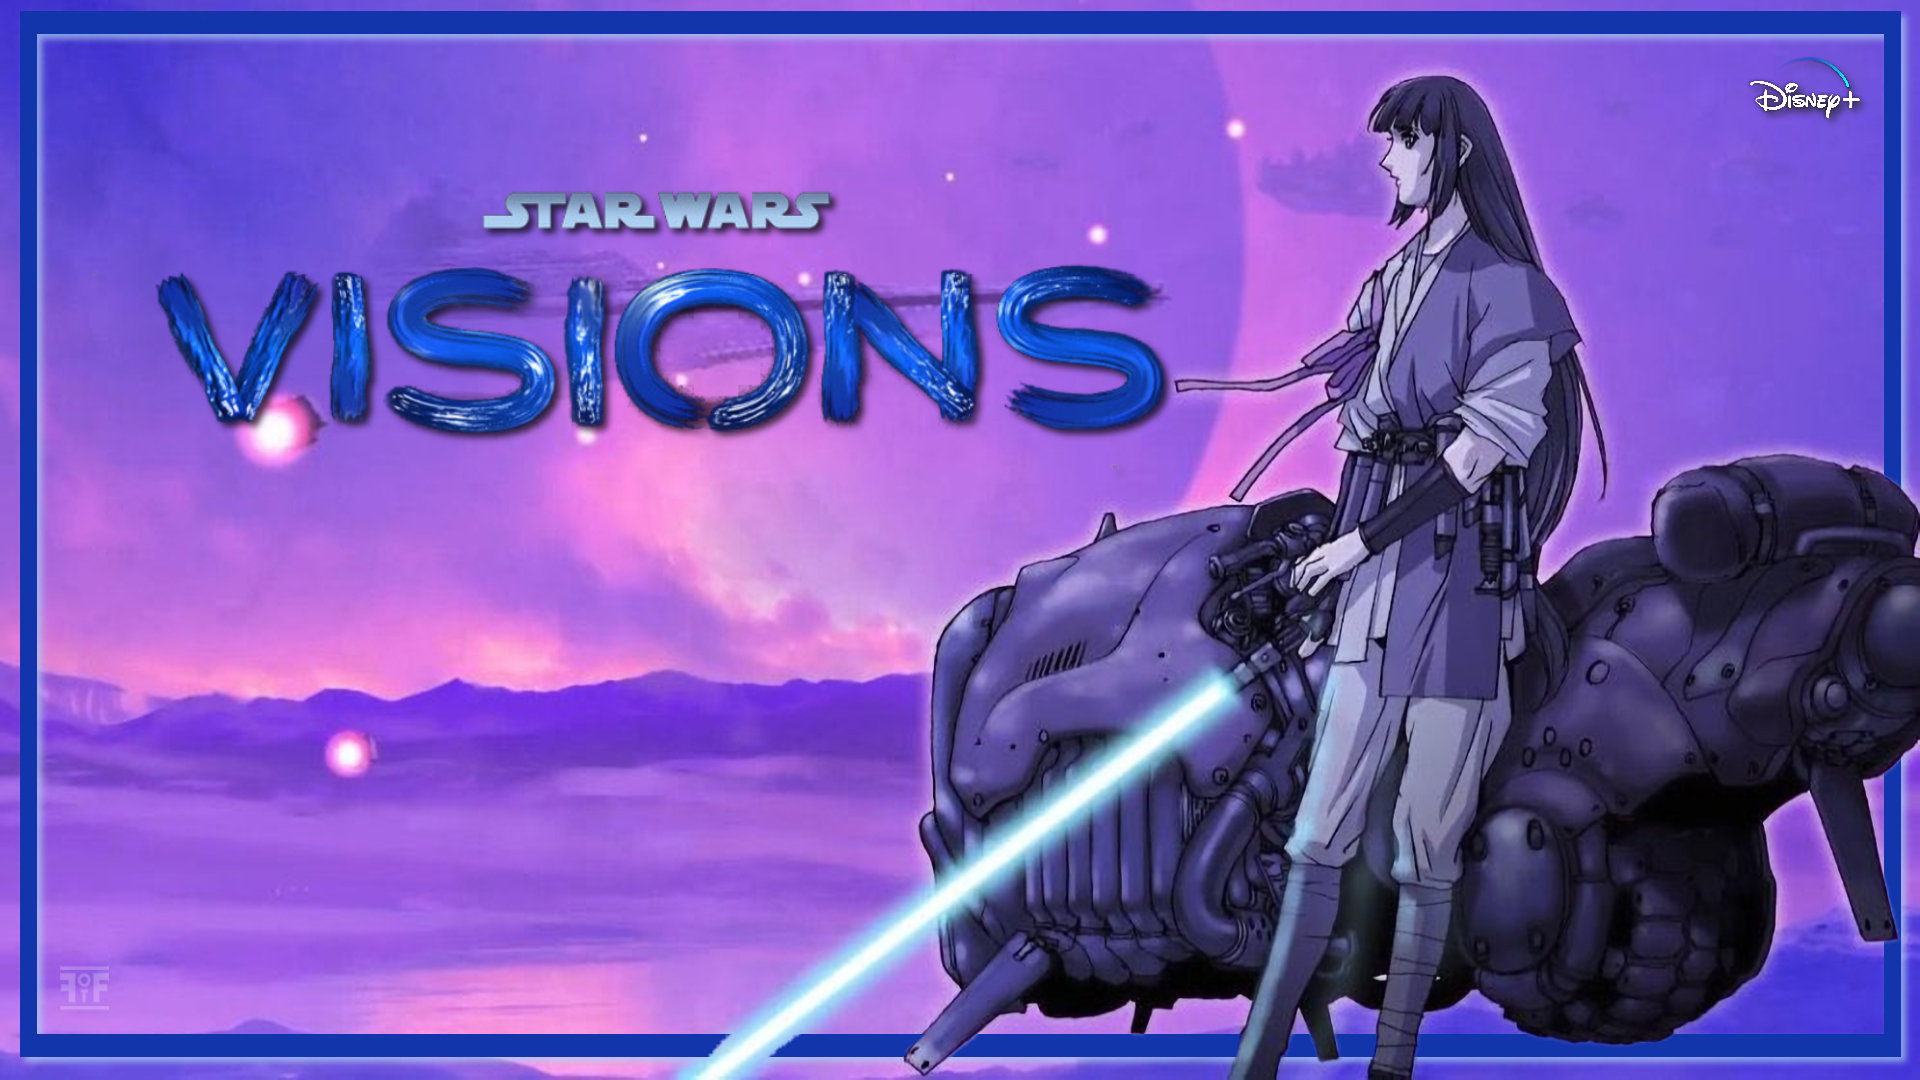 Star Wars Visions. Anime From A Galaxy Far, Far Away of the Force